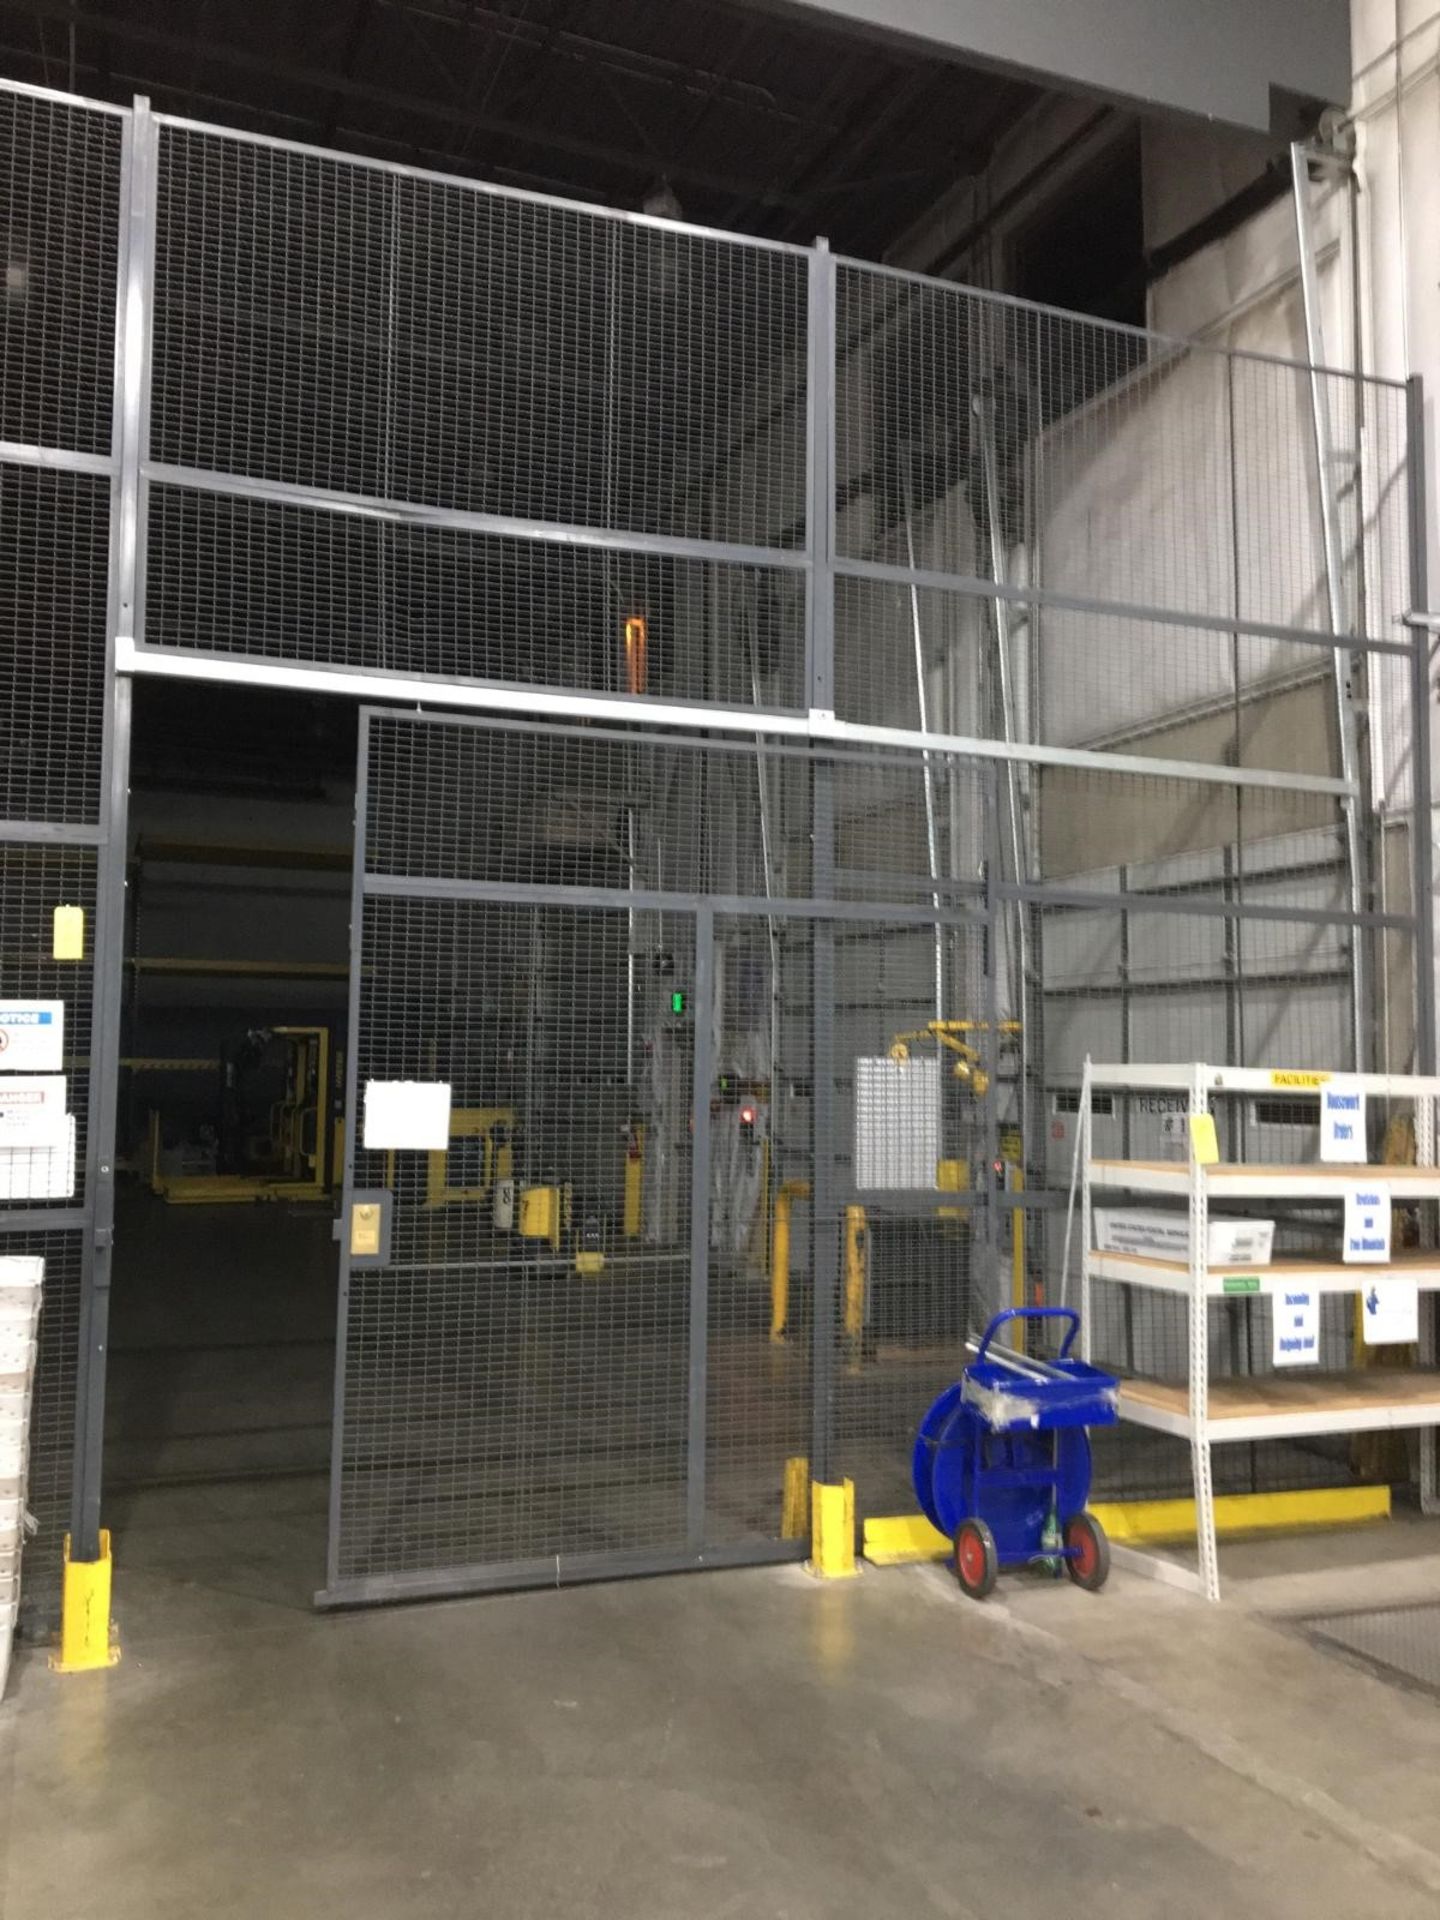 Wire Crafters Fence/Partition, 16 FT Height x 168 FT Length, 3 Doors (2 Sliding), 1 door is 7ft x 59